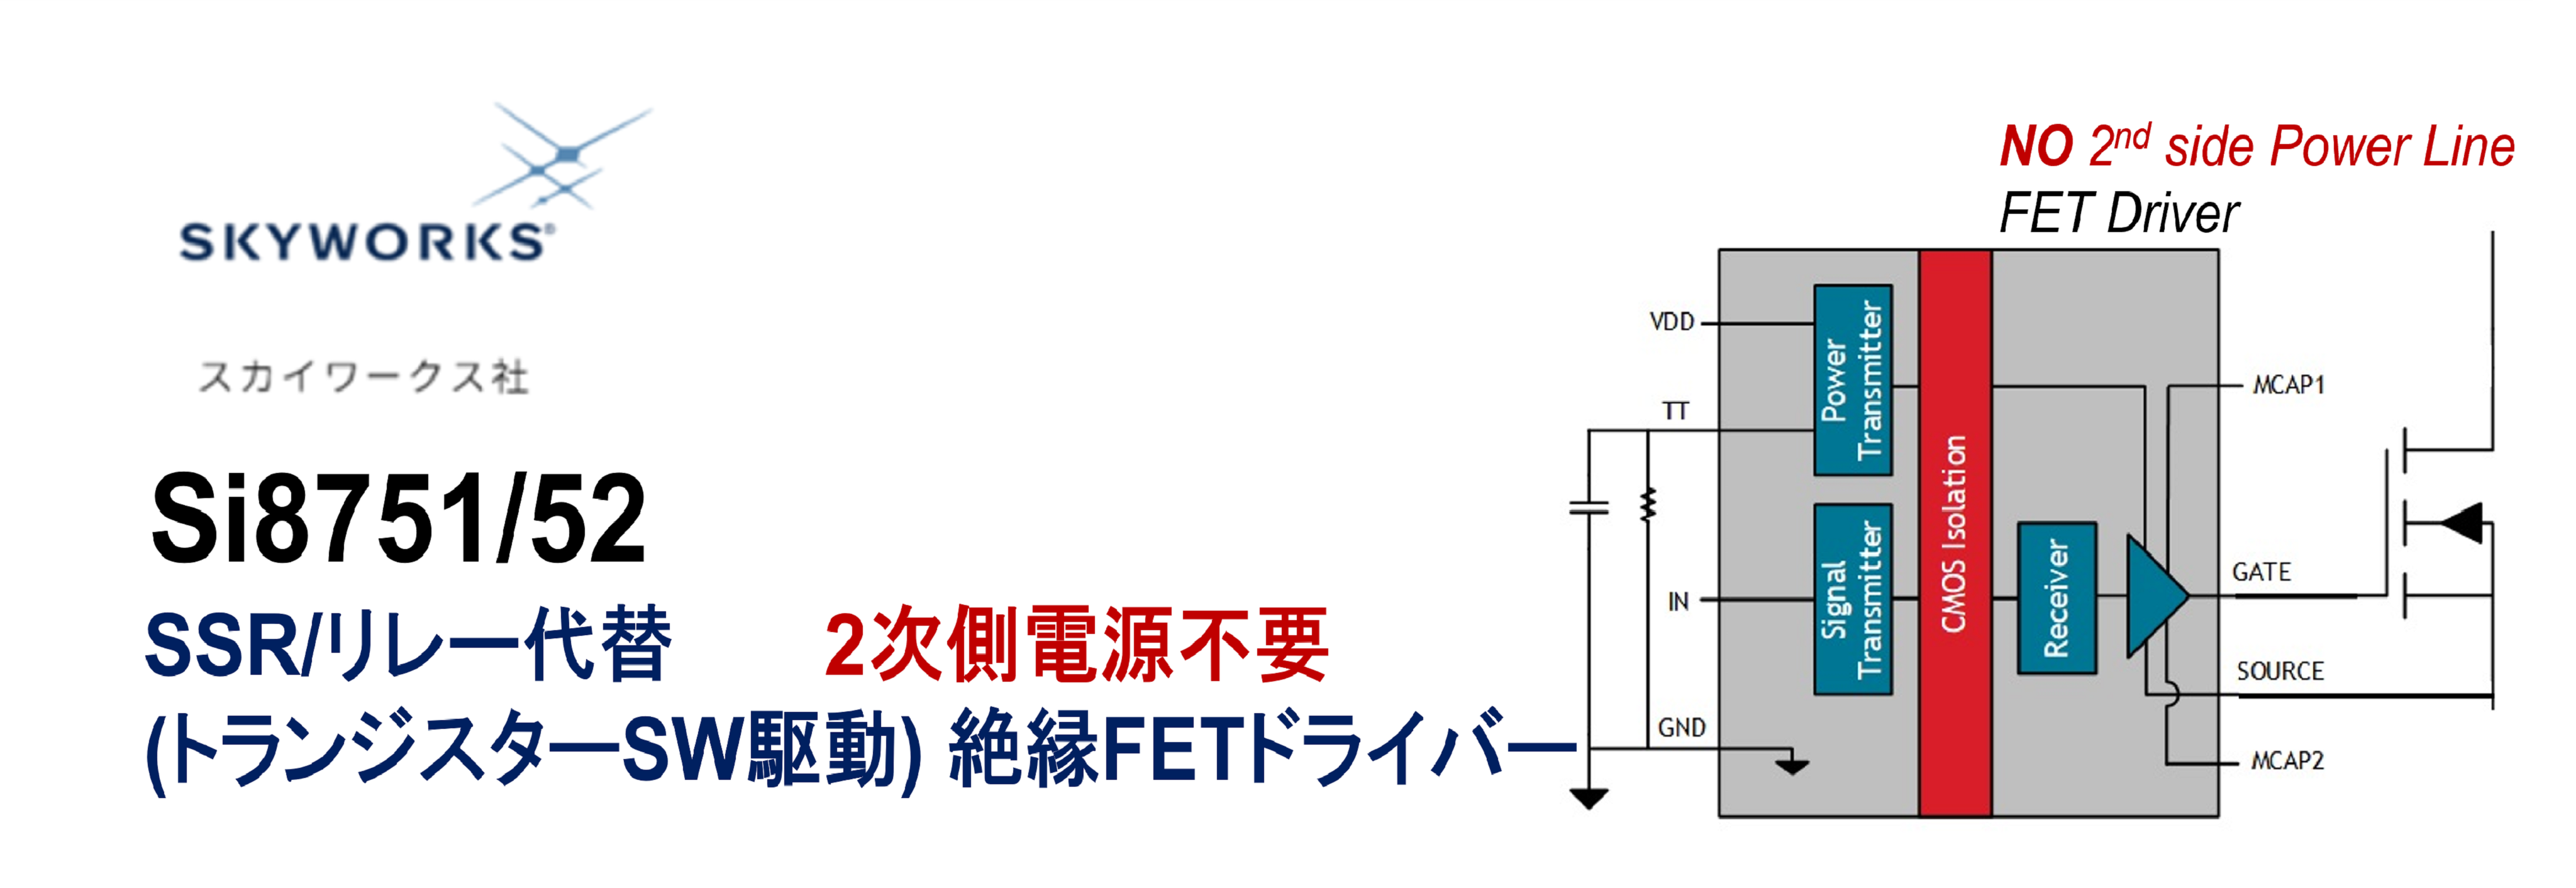 Si8751,Si8752,SSR,Solid State Relay置換え,EMR: Electro Mechanical Relay  とかElectro Magnetic Relay機械式リレー置換え,2次側電源不要